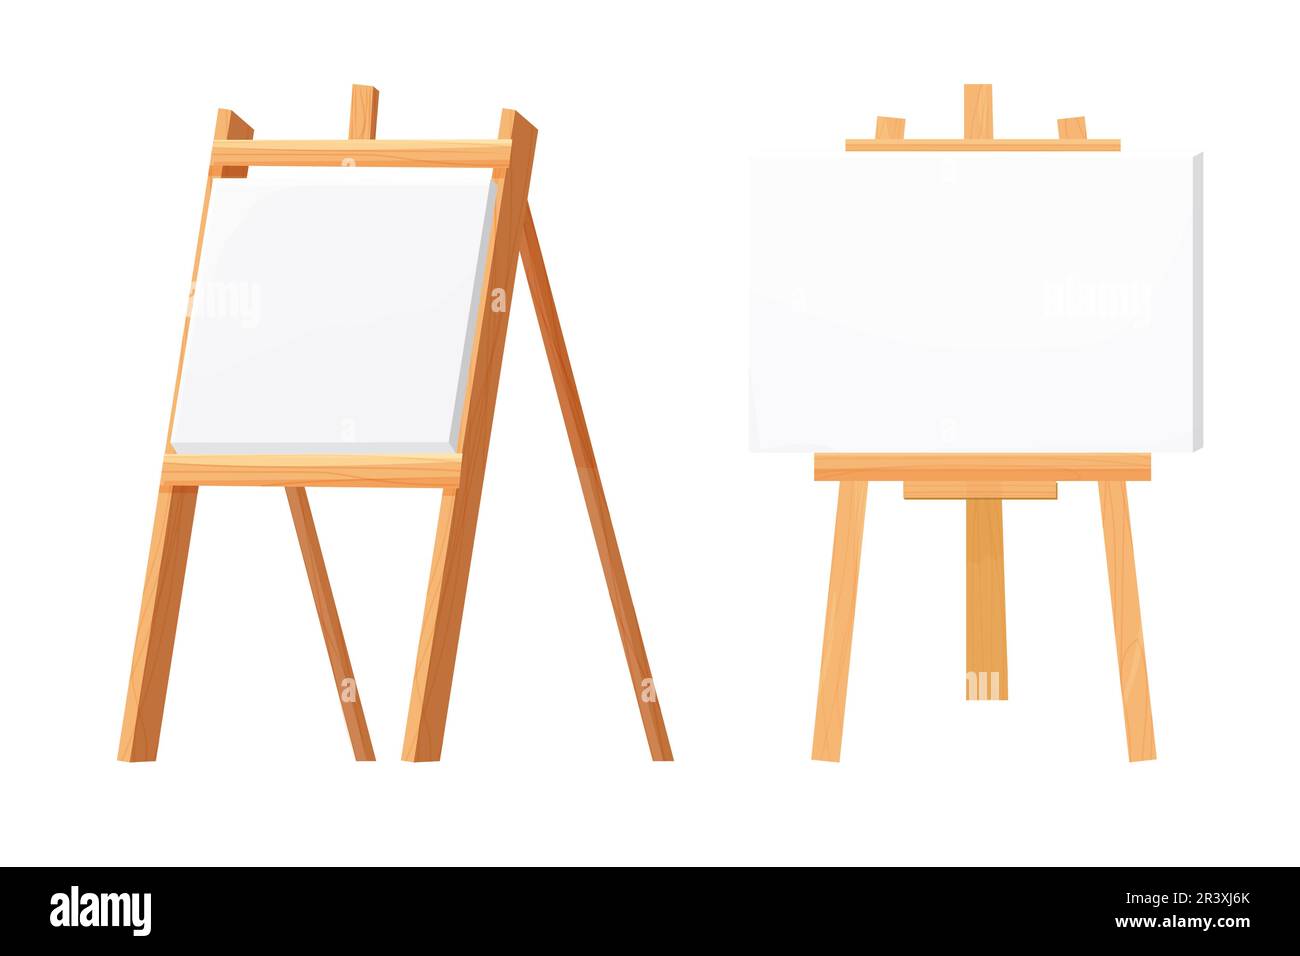 Easel, canvas stand or wooden tripod in cartoon style isolated on